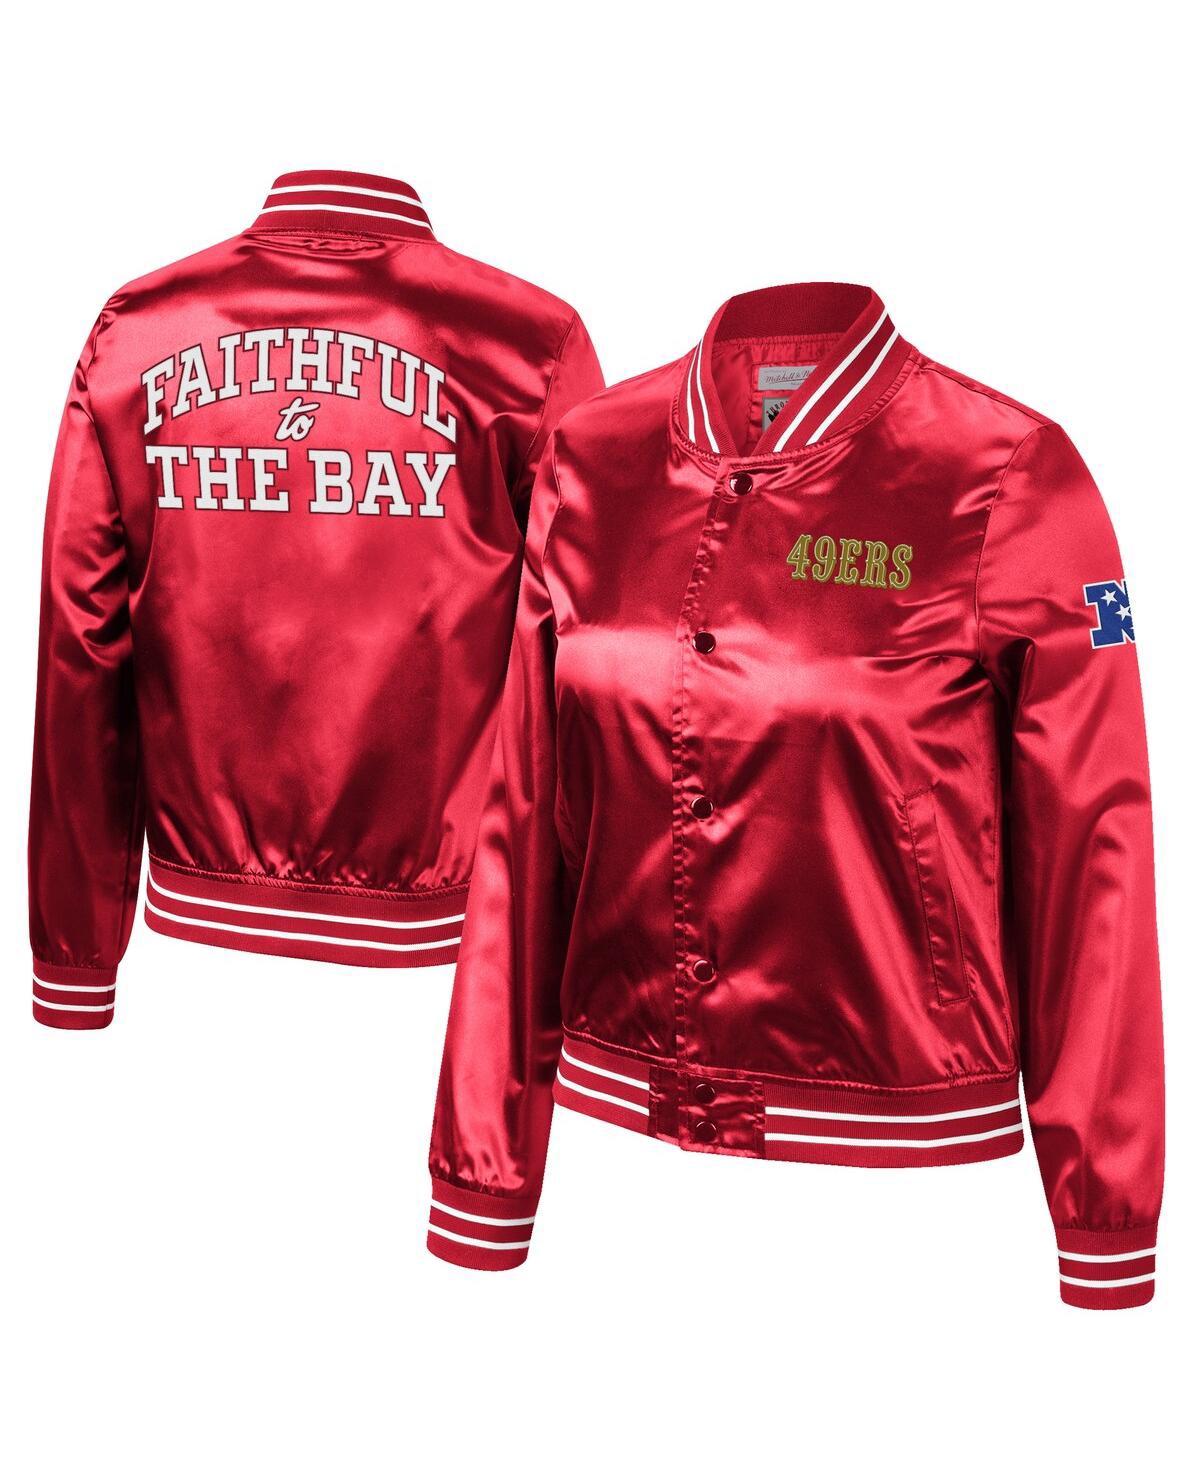 Women's Scarlet San Francisco 49ers 75th Anniversary Faithful to the Bay Satin Full-Snap Jacket size L color Gold/Red